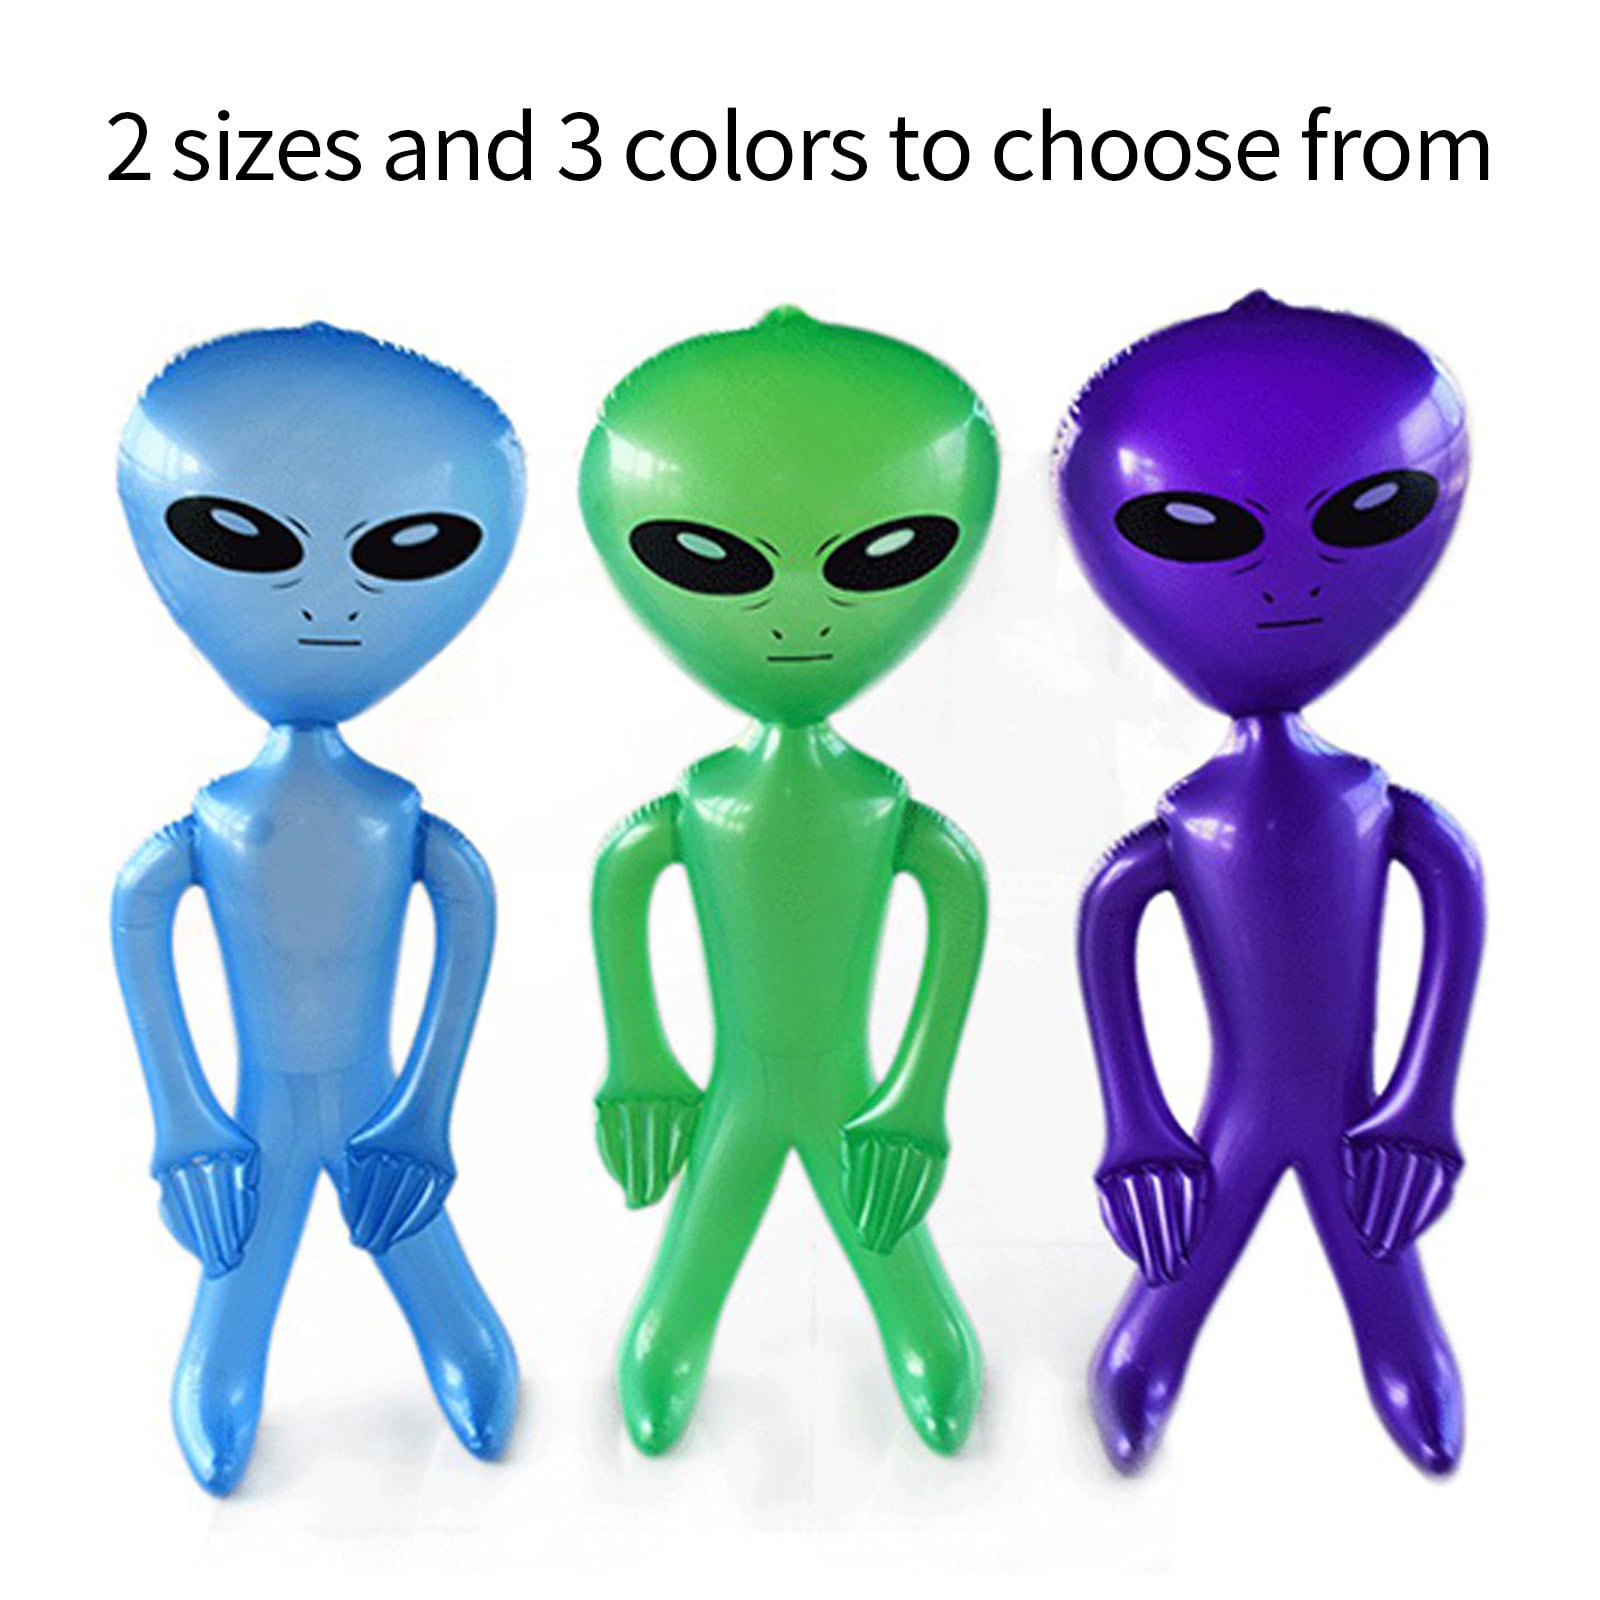 BRAND NEW Blue/ Green/ Purple 24" Alien Inflate Inflatable LOT OF 3 